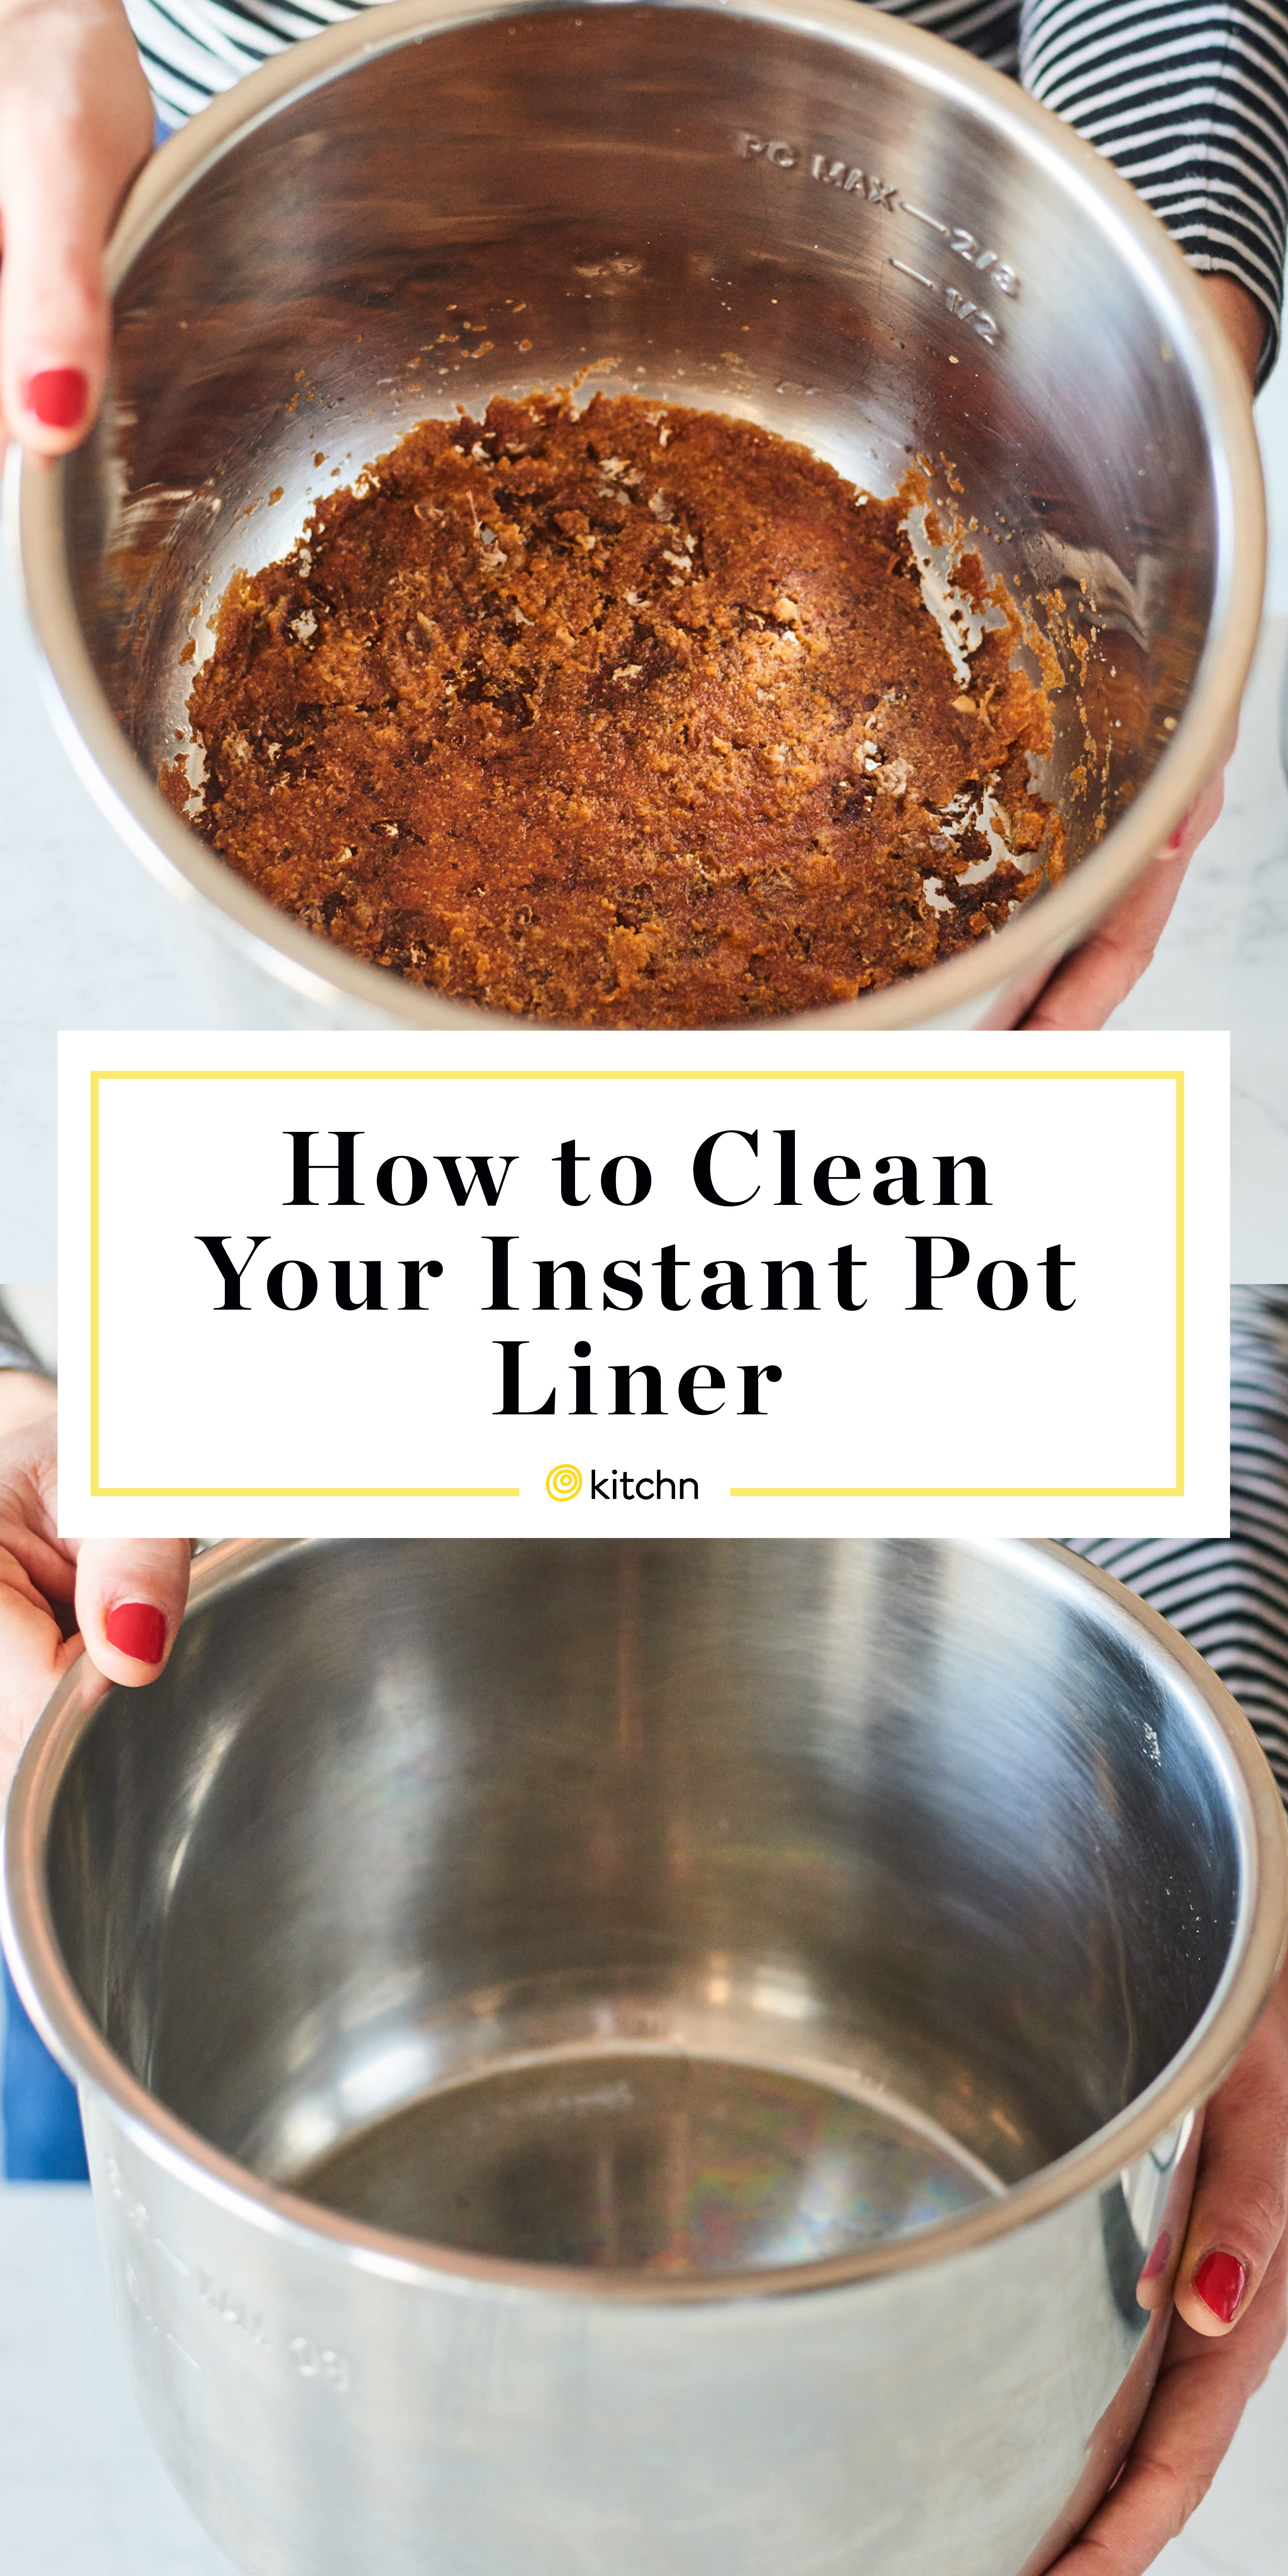 https://cdn.apartmenttherapy.info/image/upload/v1582300783/k/Photo/Lifestyle/2020-02-How-To-Clean-Burnt-Instant-Pot-Liner/howtocleanyourinstantpotliner.jpg